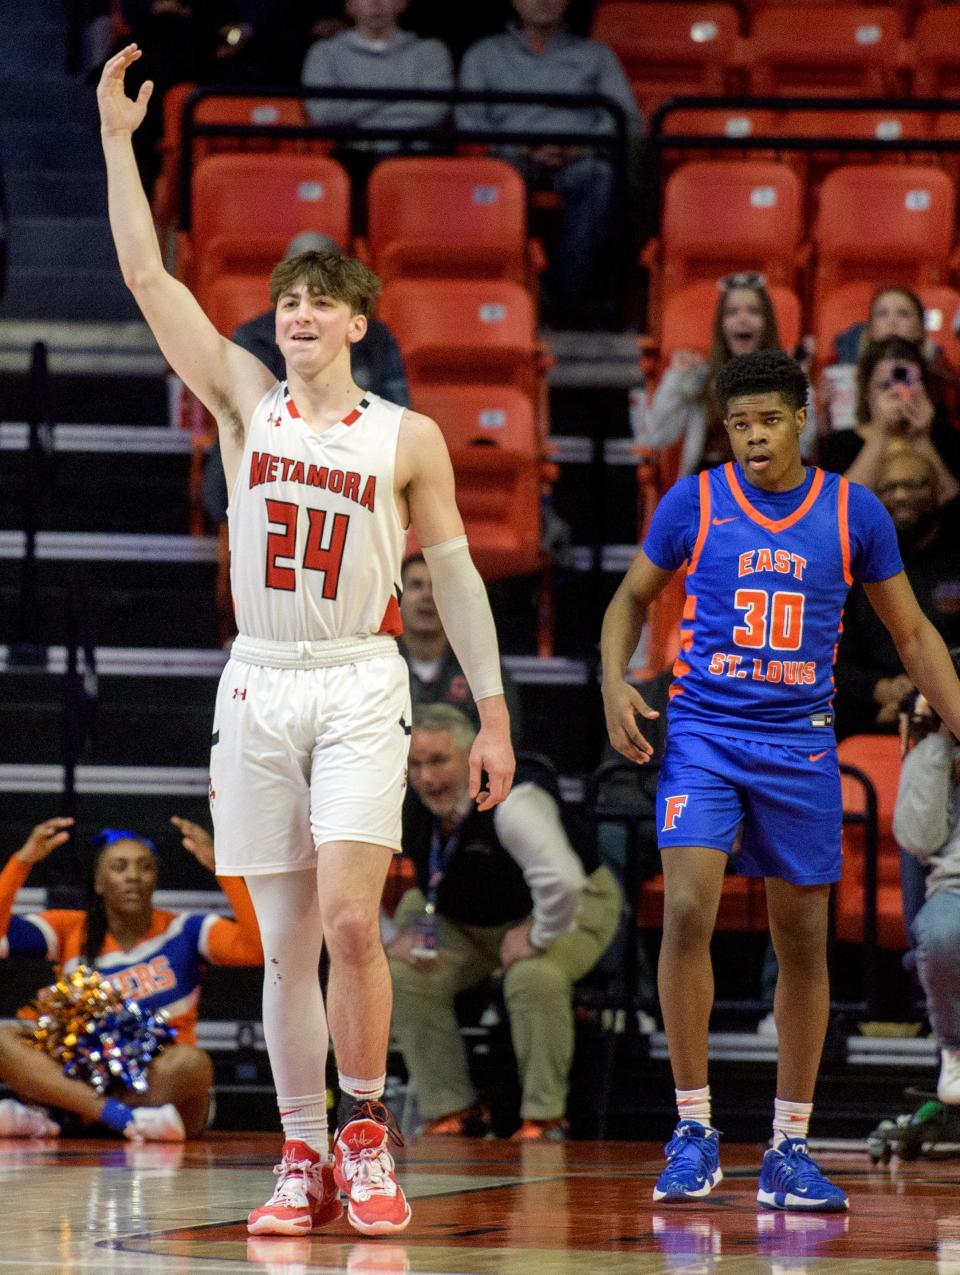 Metamora's Drew Tucker (24) celebrates as time runs out on the Class 3A state semifinal game Friday, March 10, 2023 at State Farm Center in Champaign. The Redbirds advanced to the title game with a 50-43 win over East St. Louis.